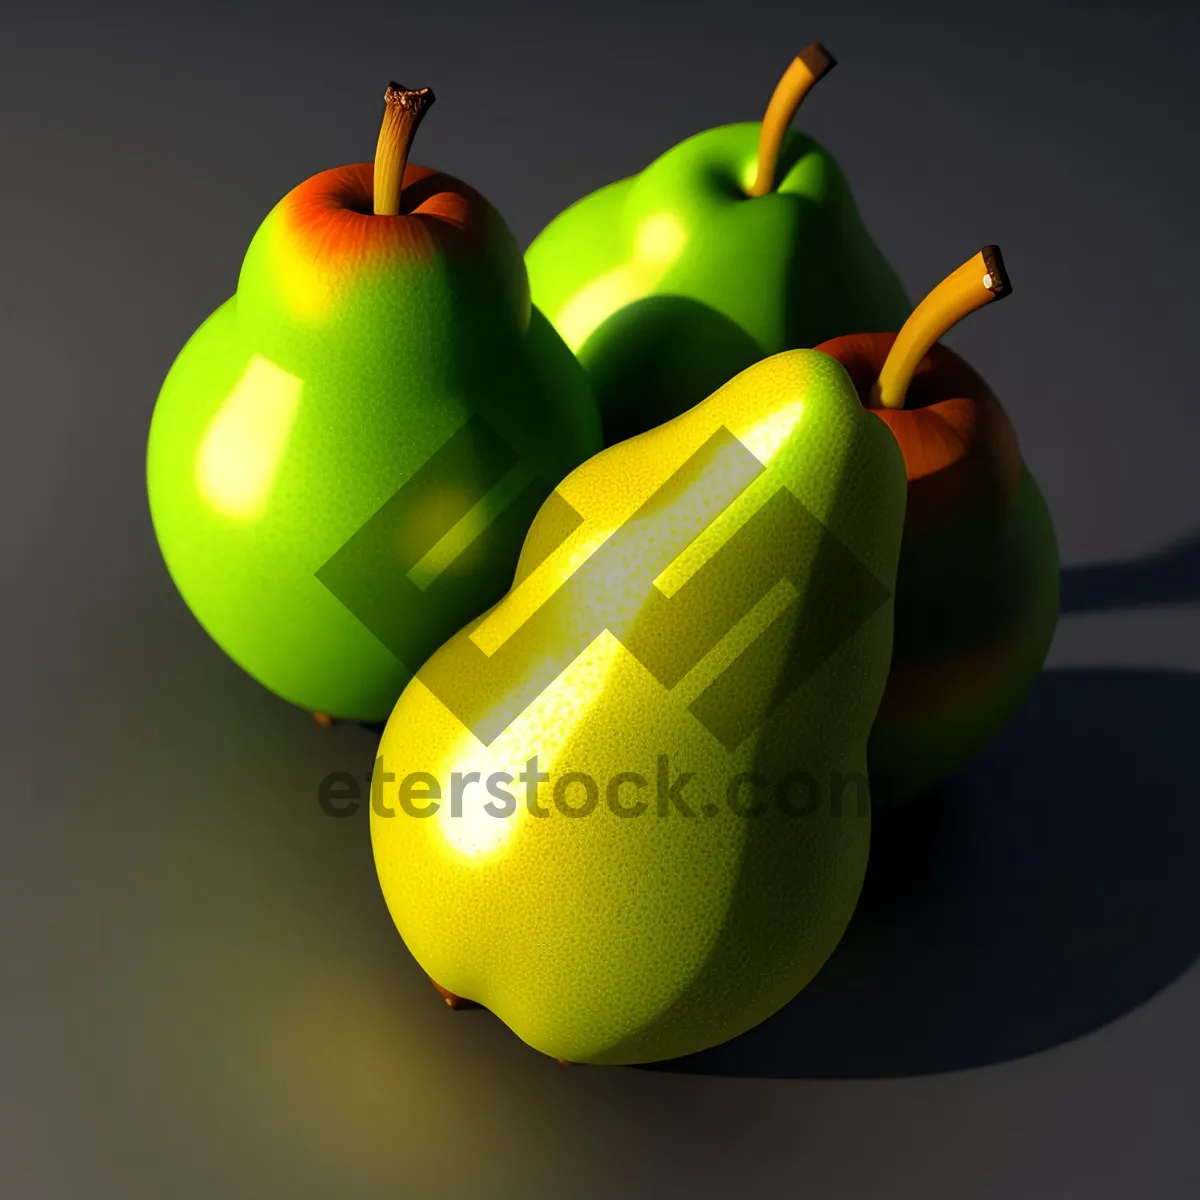 Picture of Fresh and Juicy Granny Smith Apples